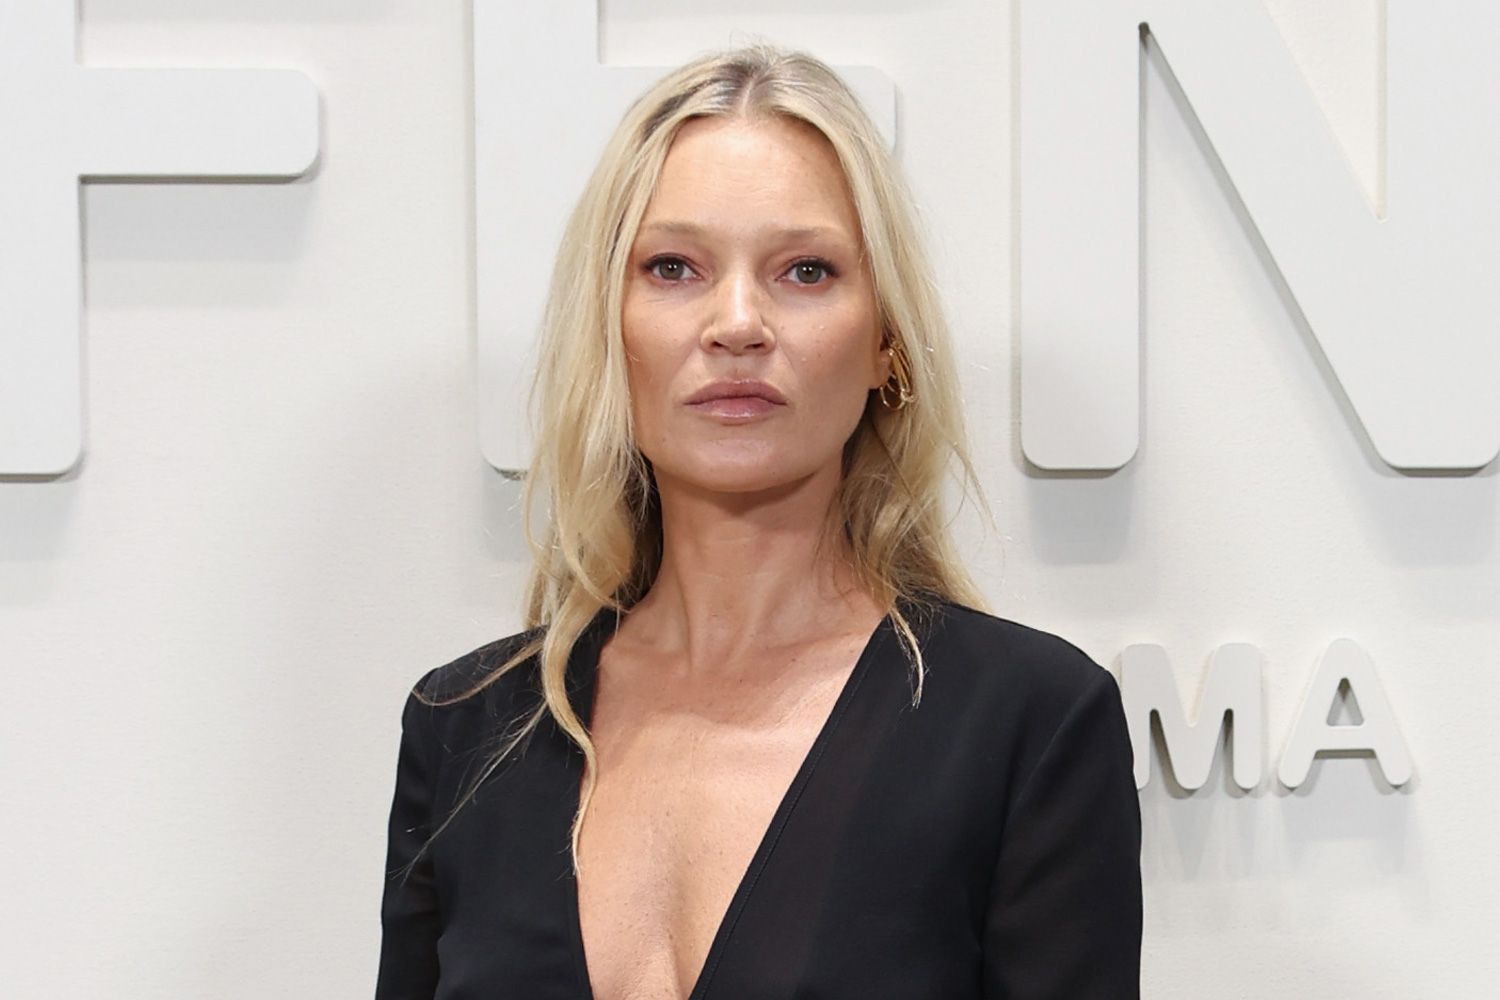 mind-blowing-resemblance-kate-moss-look-alike-takes-over-paris-fashion-week